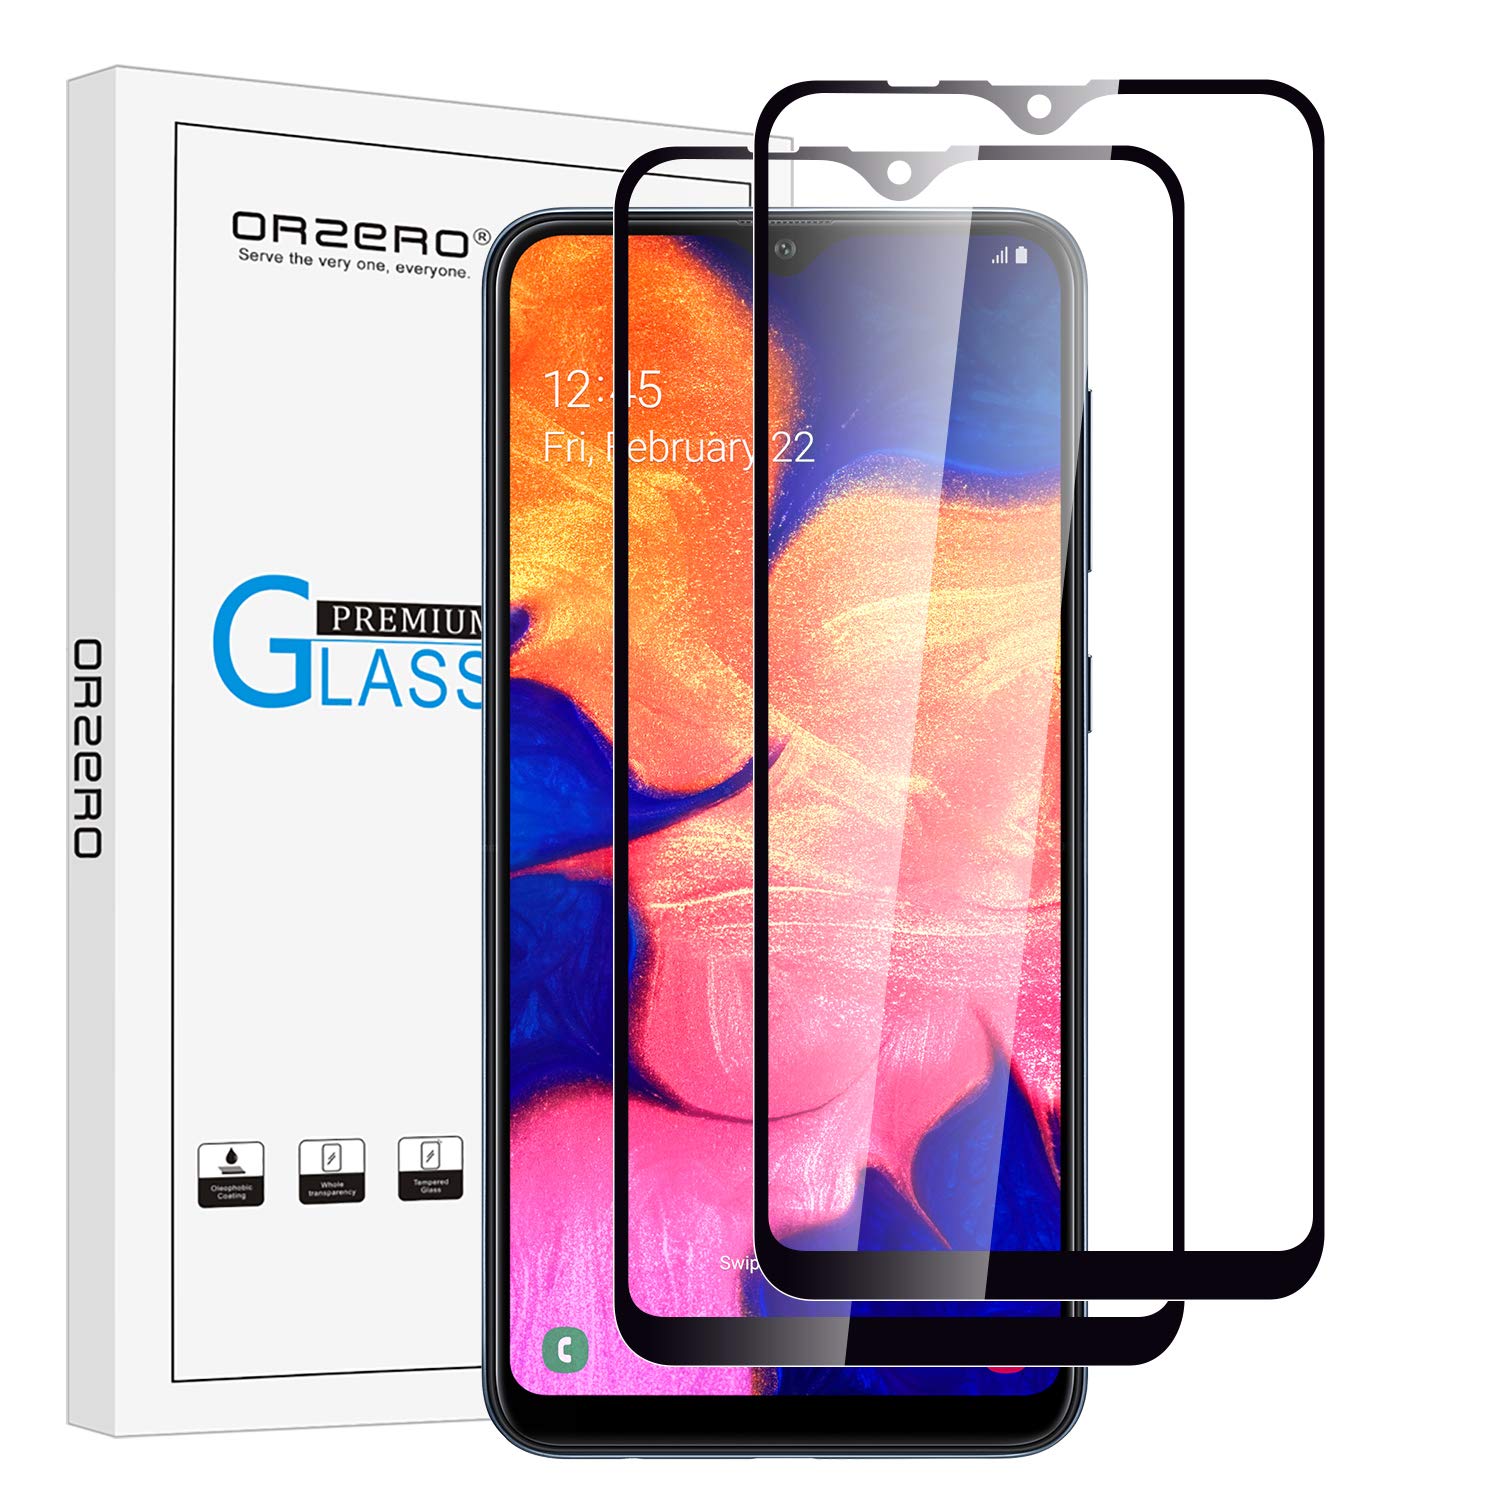 9H Hardness Anti Fingerprint 1 Pack CUSKING Screen Protector for Galaxy A10 Bubble Free Tempered Glass Screen Protector Film for Samsung Galaxy A10 